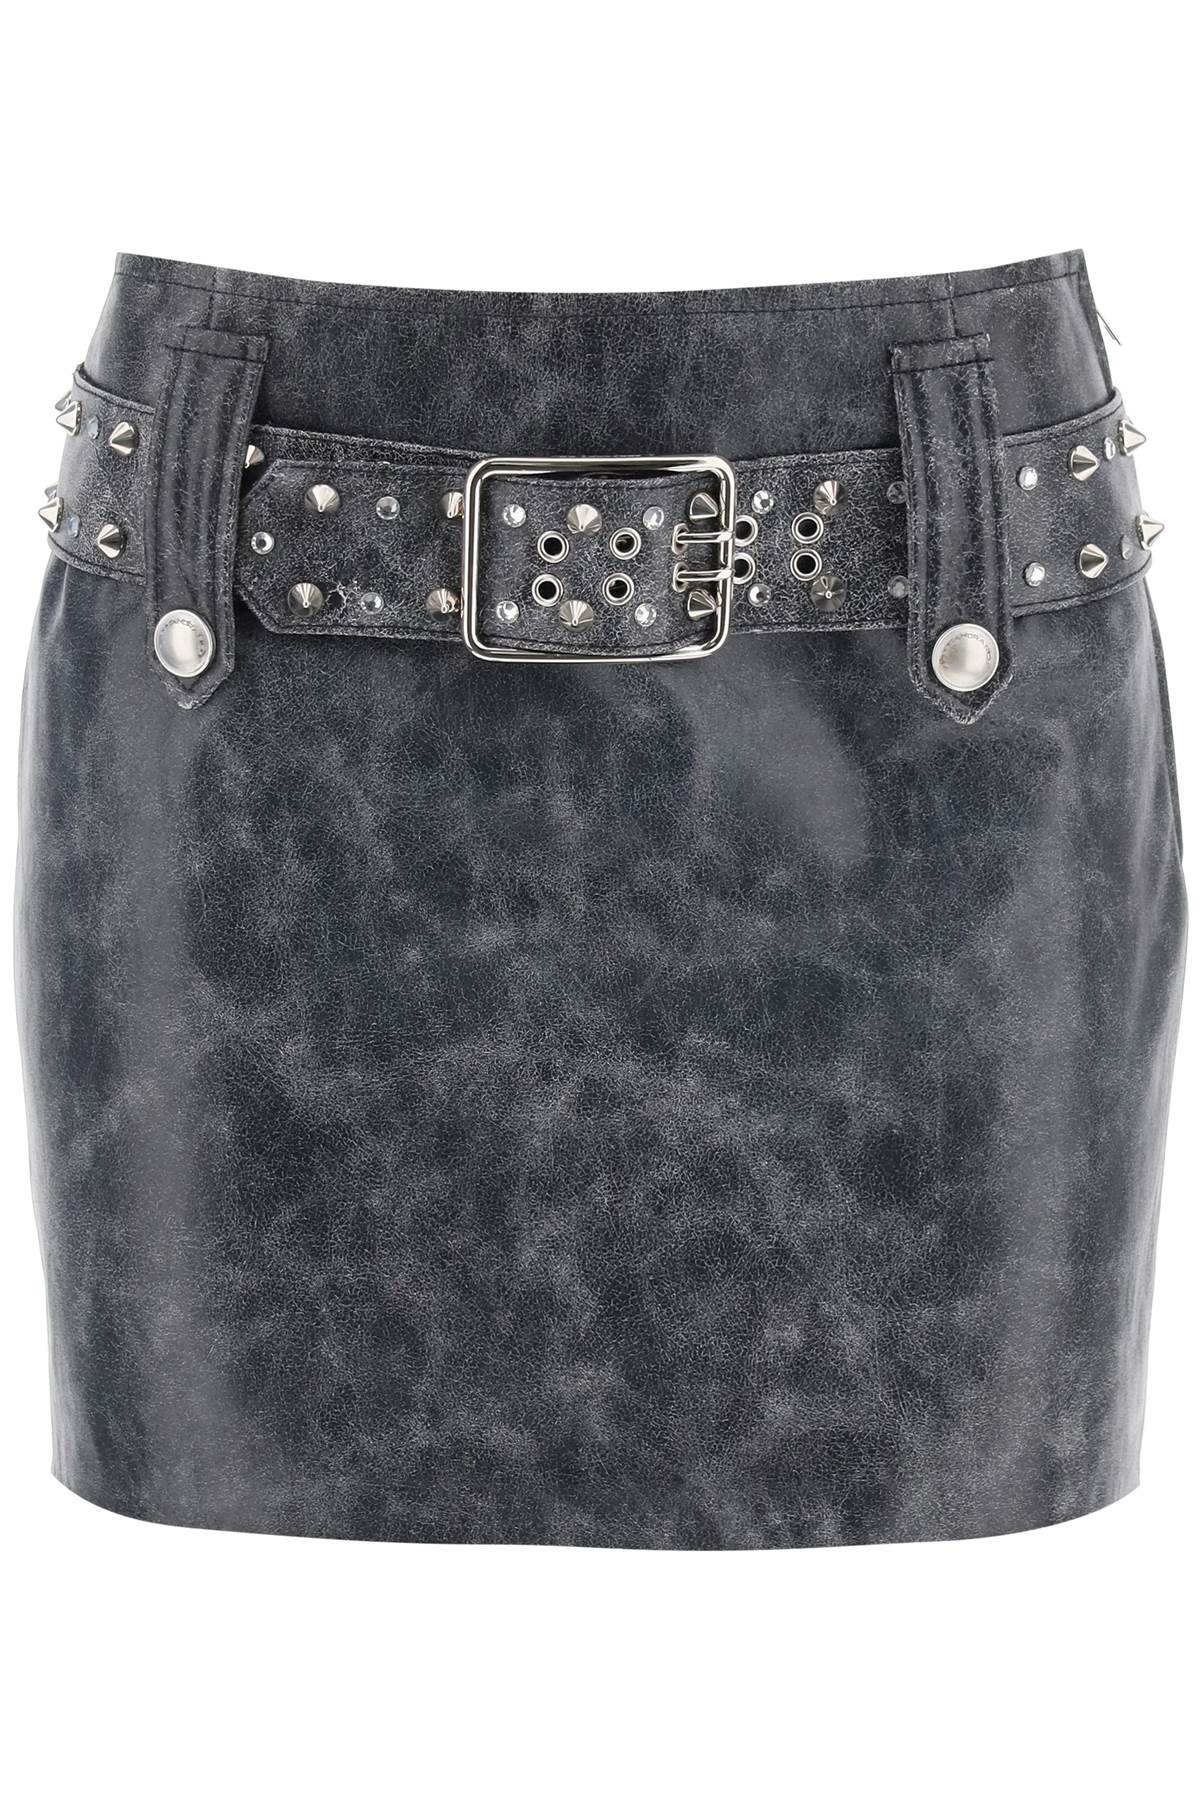 Alessandra rich leather mini skirt with belt and appliques-women > clothing > skirts > mini-Alessandra Rich-Urbanheer